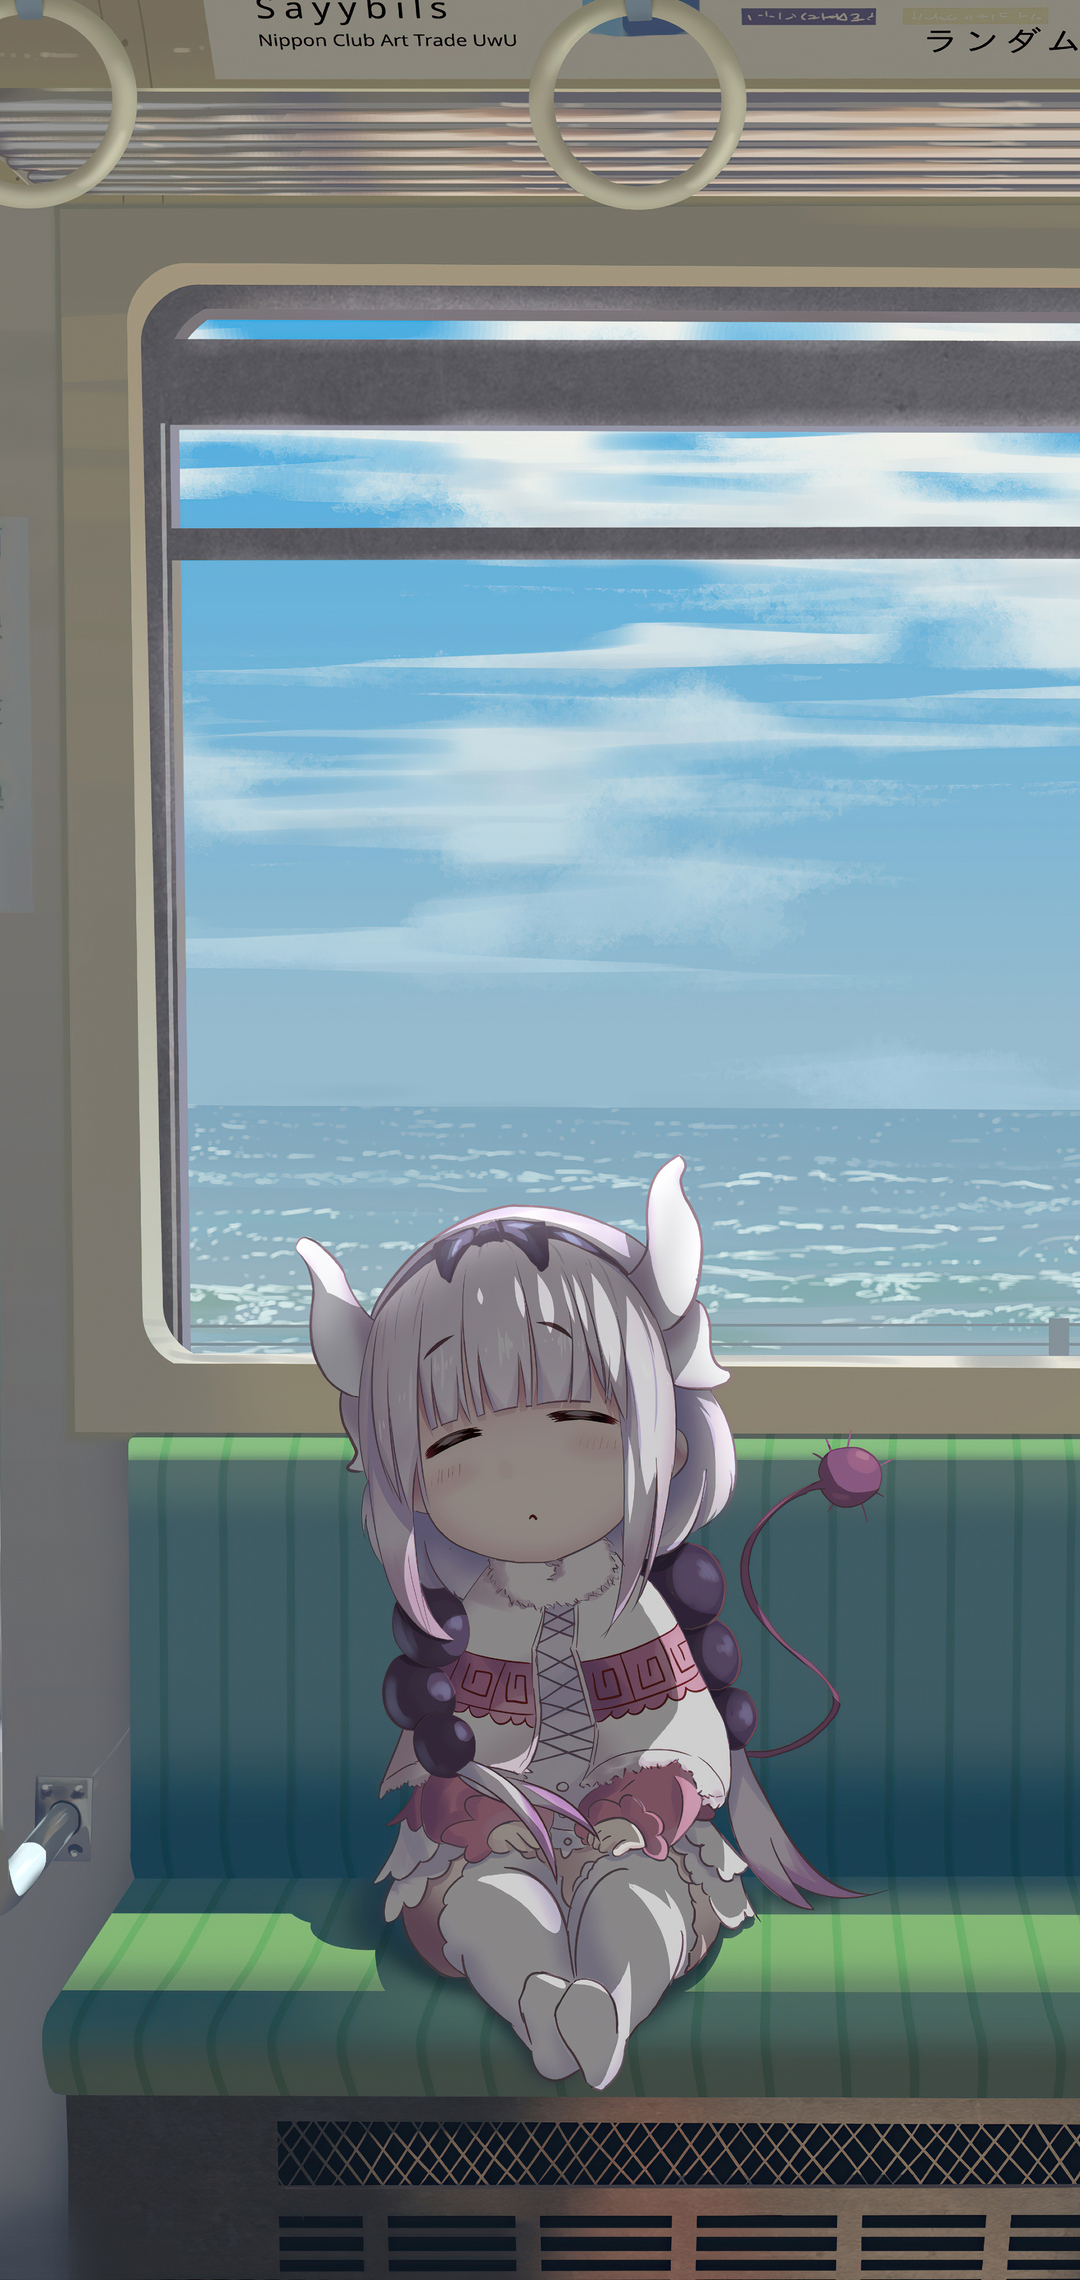 1080x2280 Sleeping Kanna Kamui 4k One Plus 6,Huawei p20,Honor view 10,Vivo  y85,Oppo f7,Xiaomi Mi A2 HD 4k Wallpapers, Images, Backgrounds, Photos and  Pictures